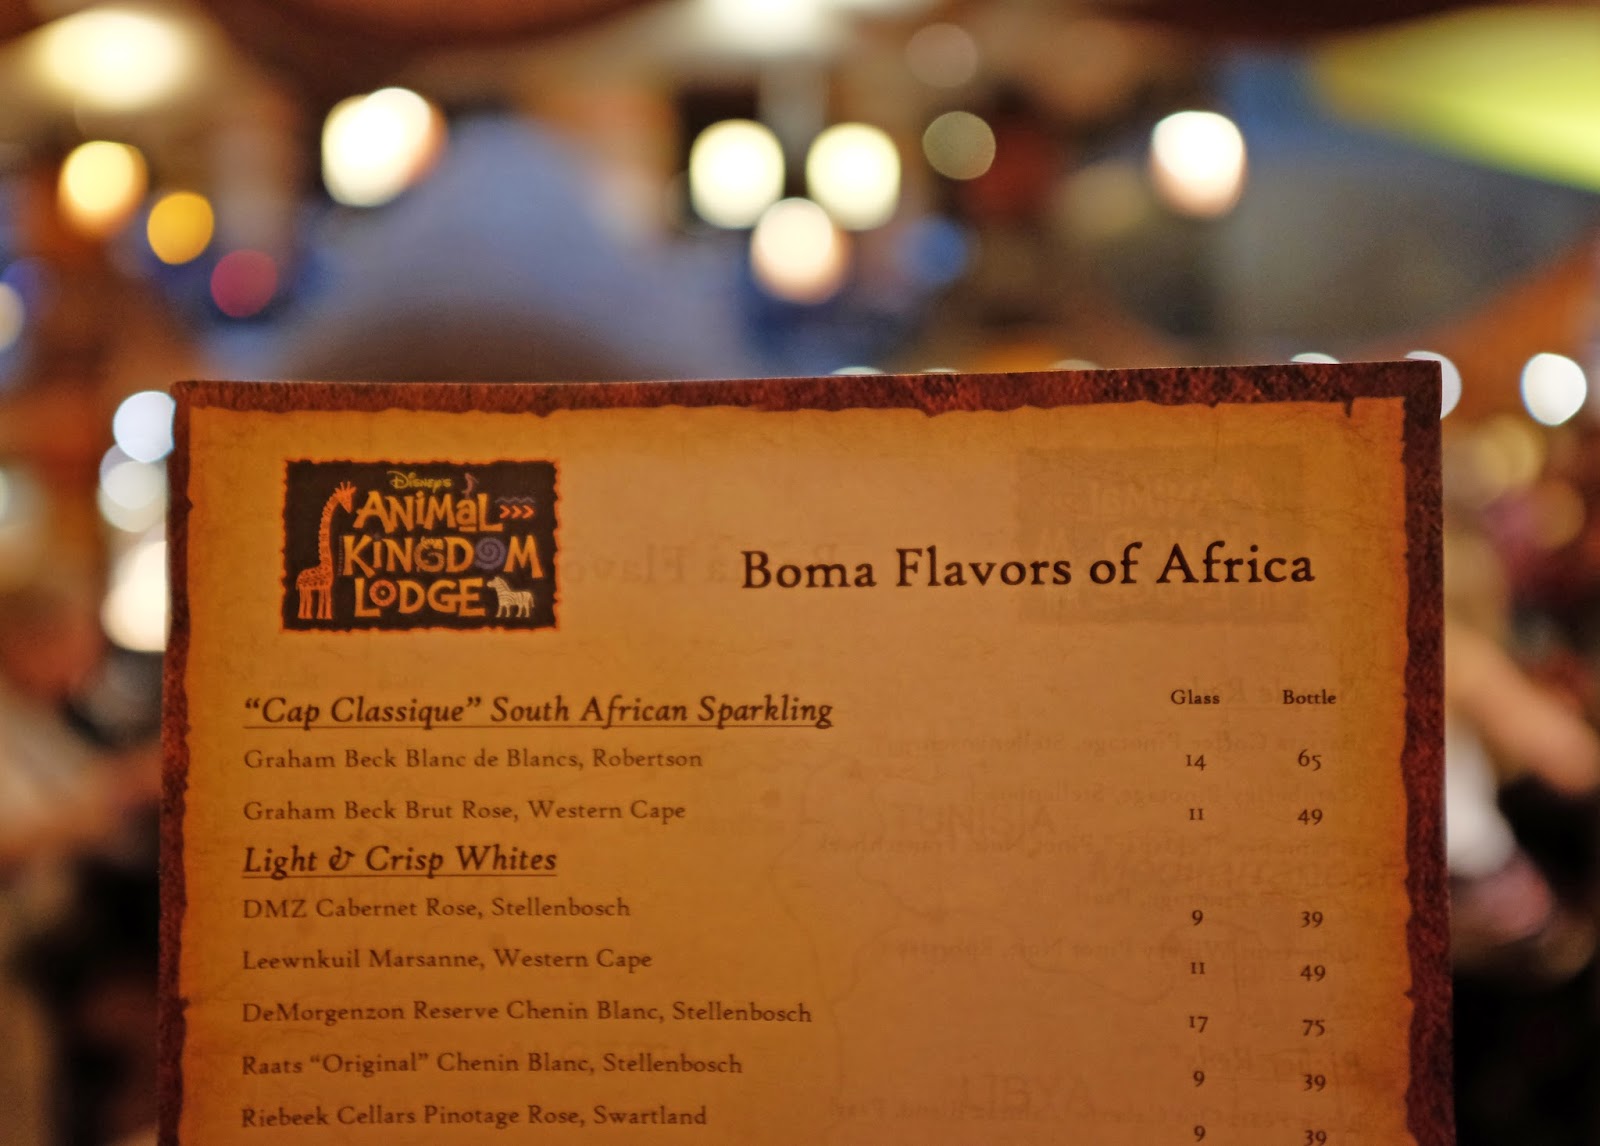 Boma - Flavours of Africa at the Animal Kingdom Lodge